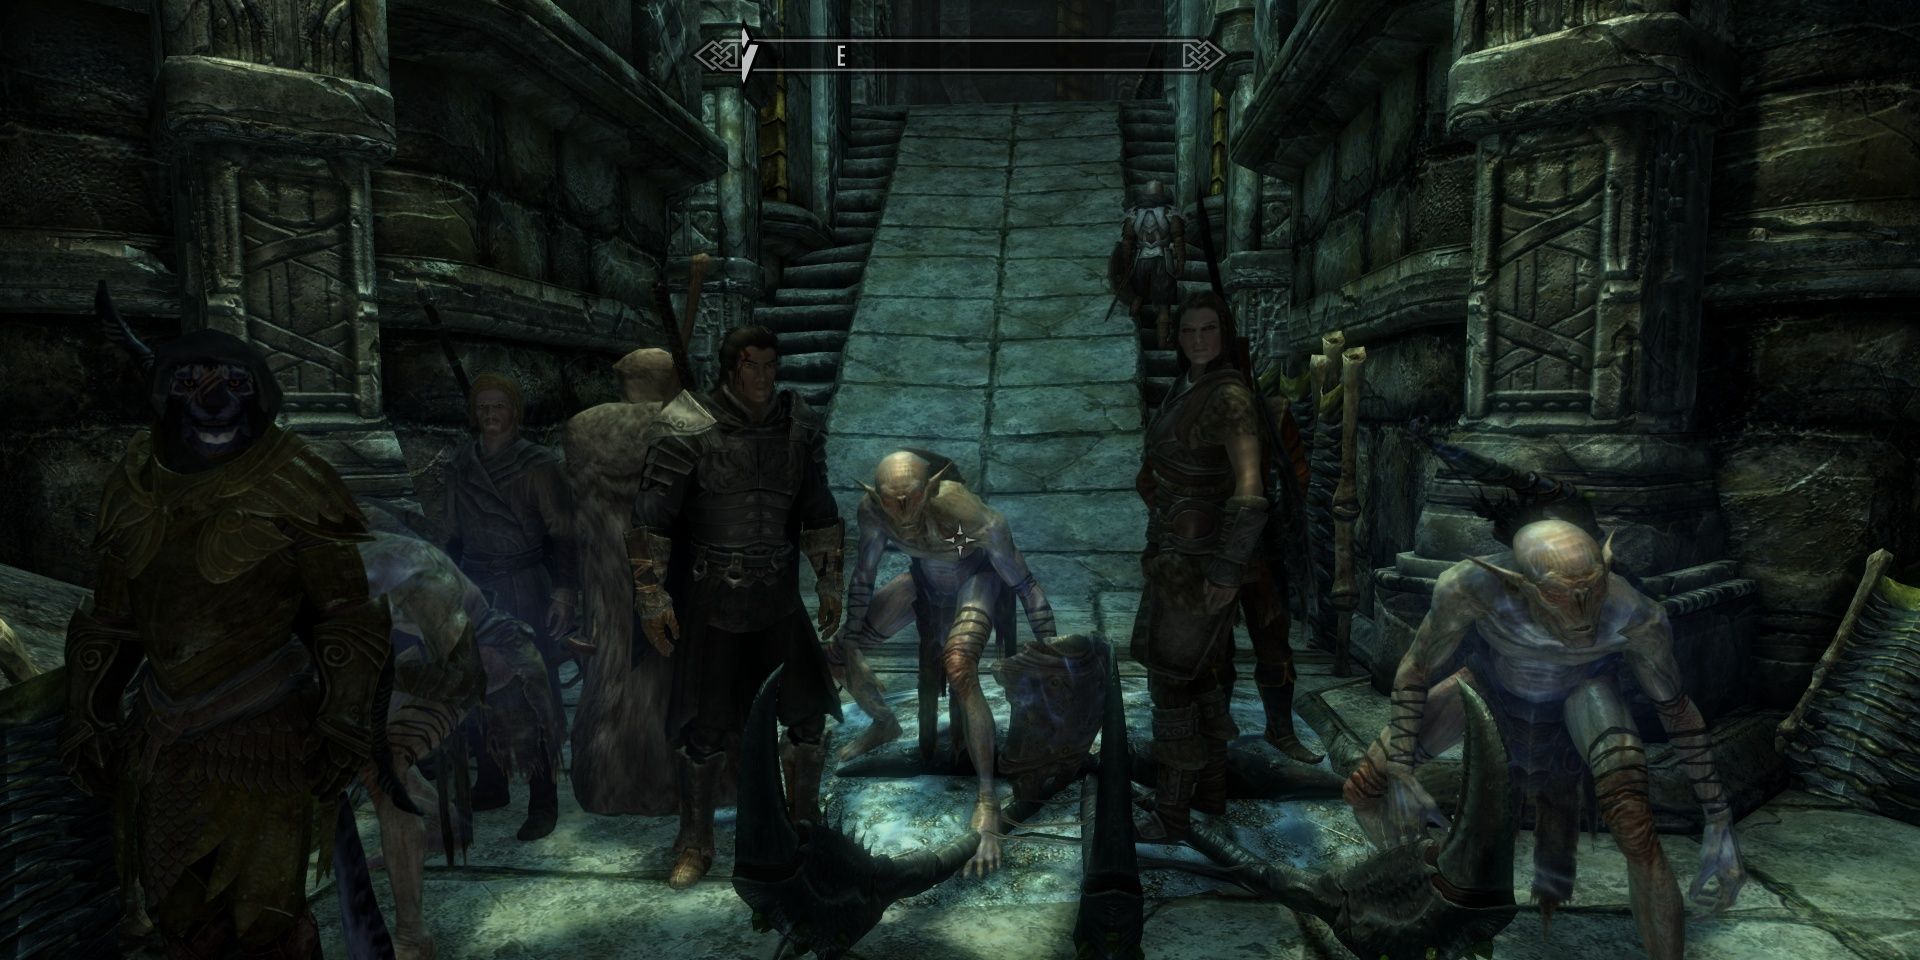 Skyrim group of Falmer and modded followers. Picture from Reddit user u/PrestonPirateKing